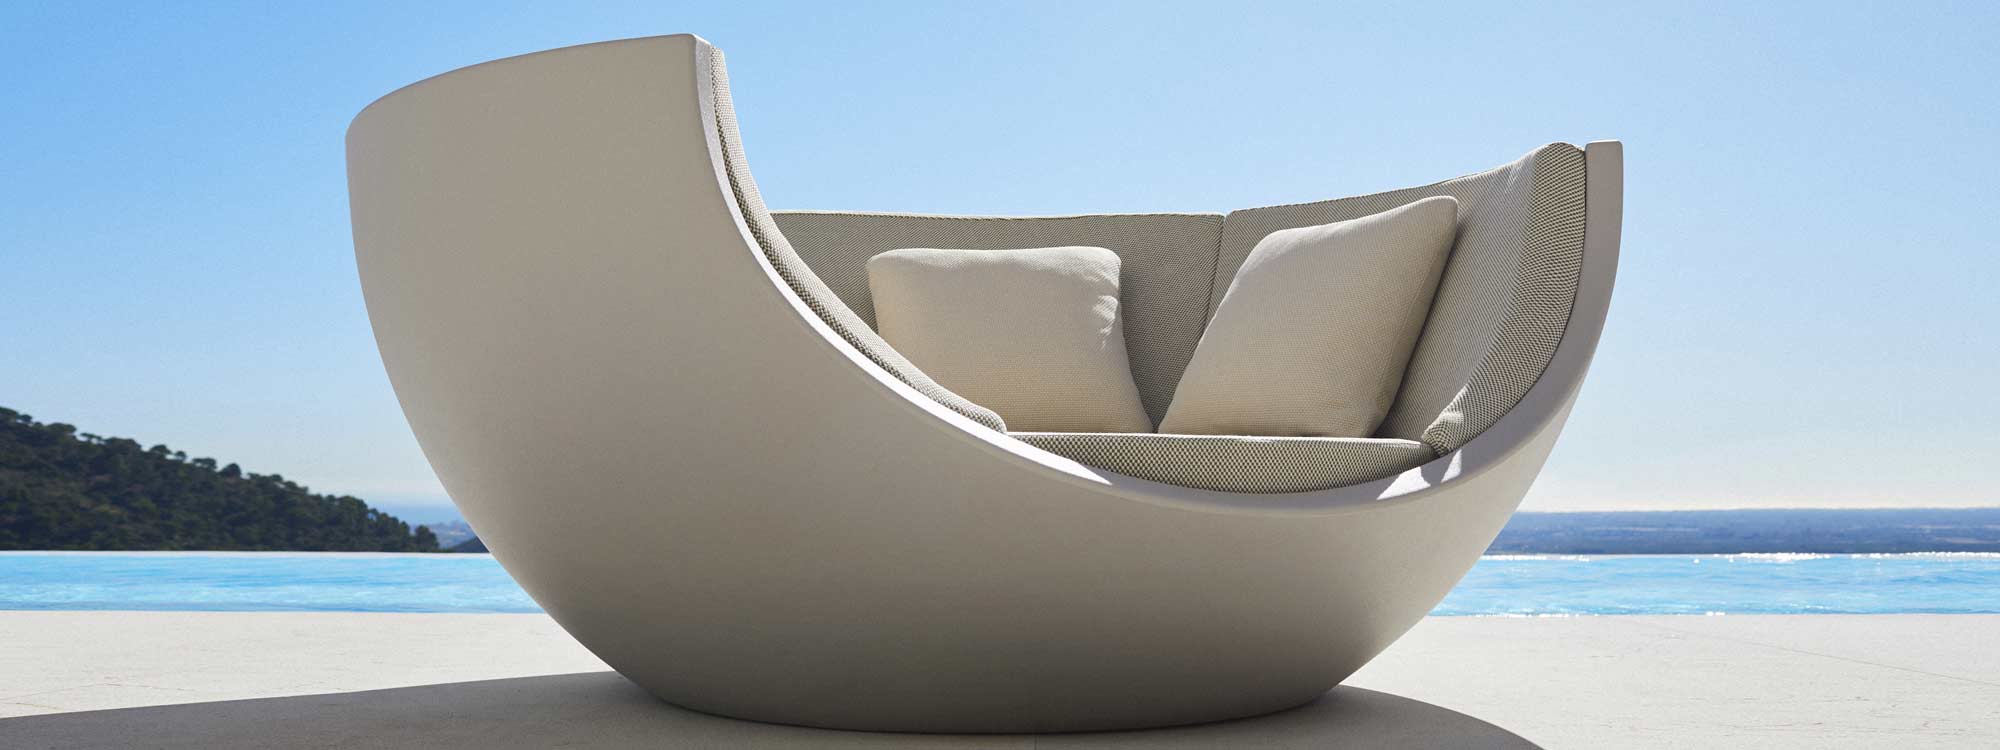 Image of Vondom Moon modern garden daybed with horizon swimming pool and hills in the background